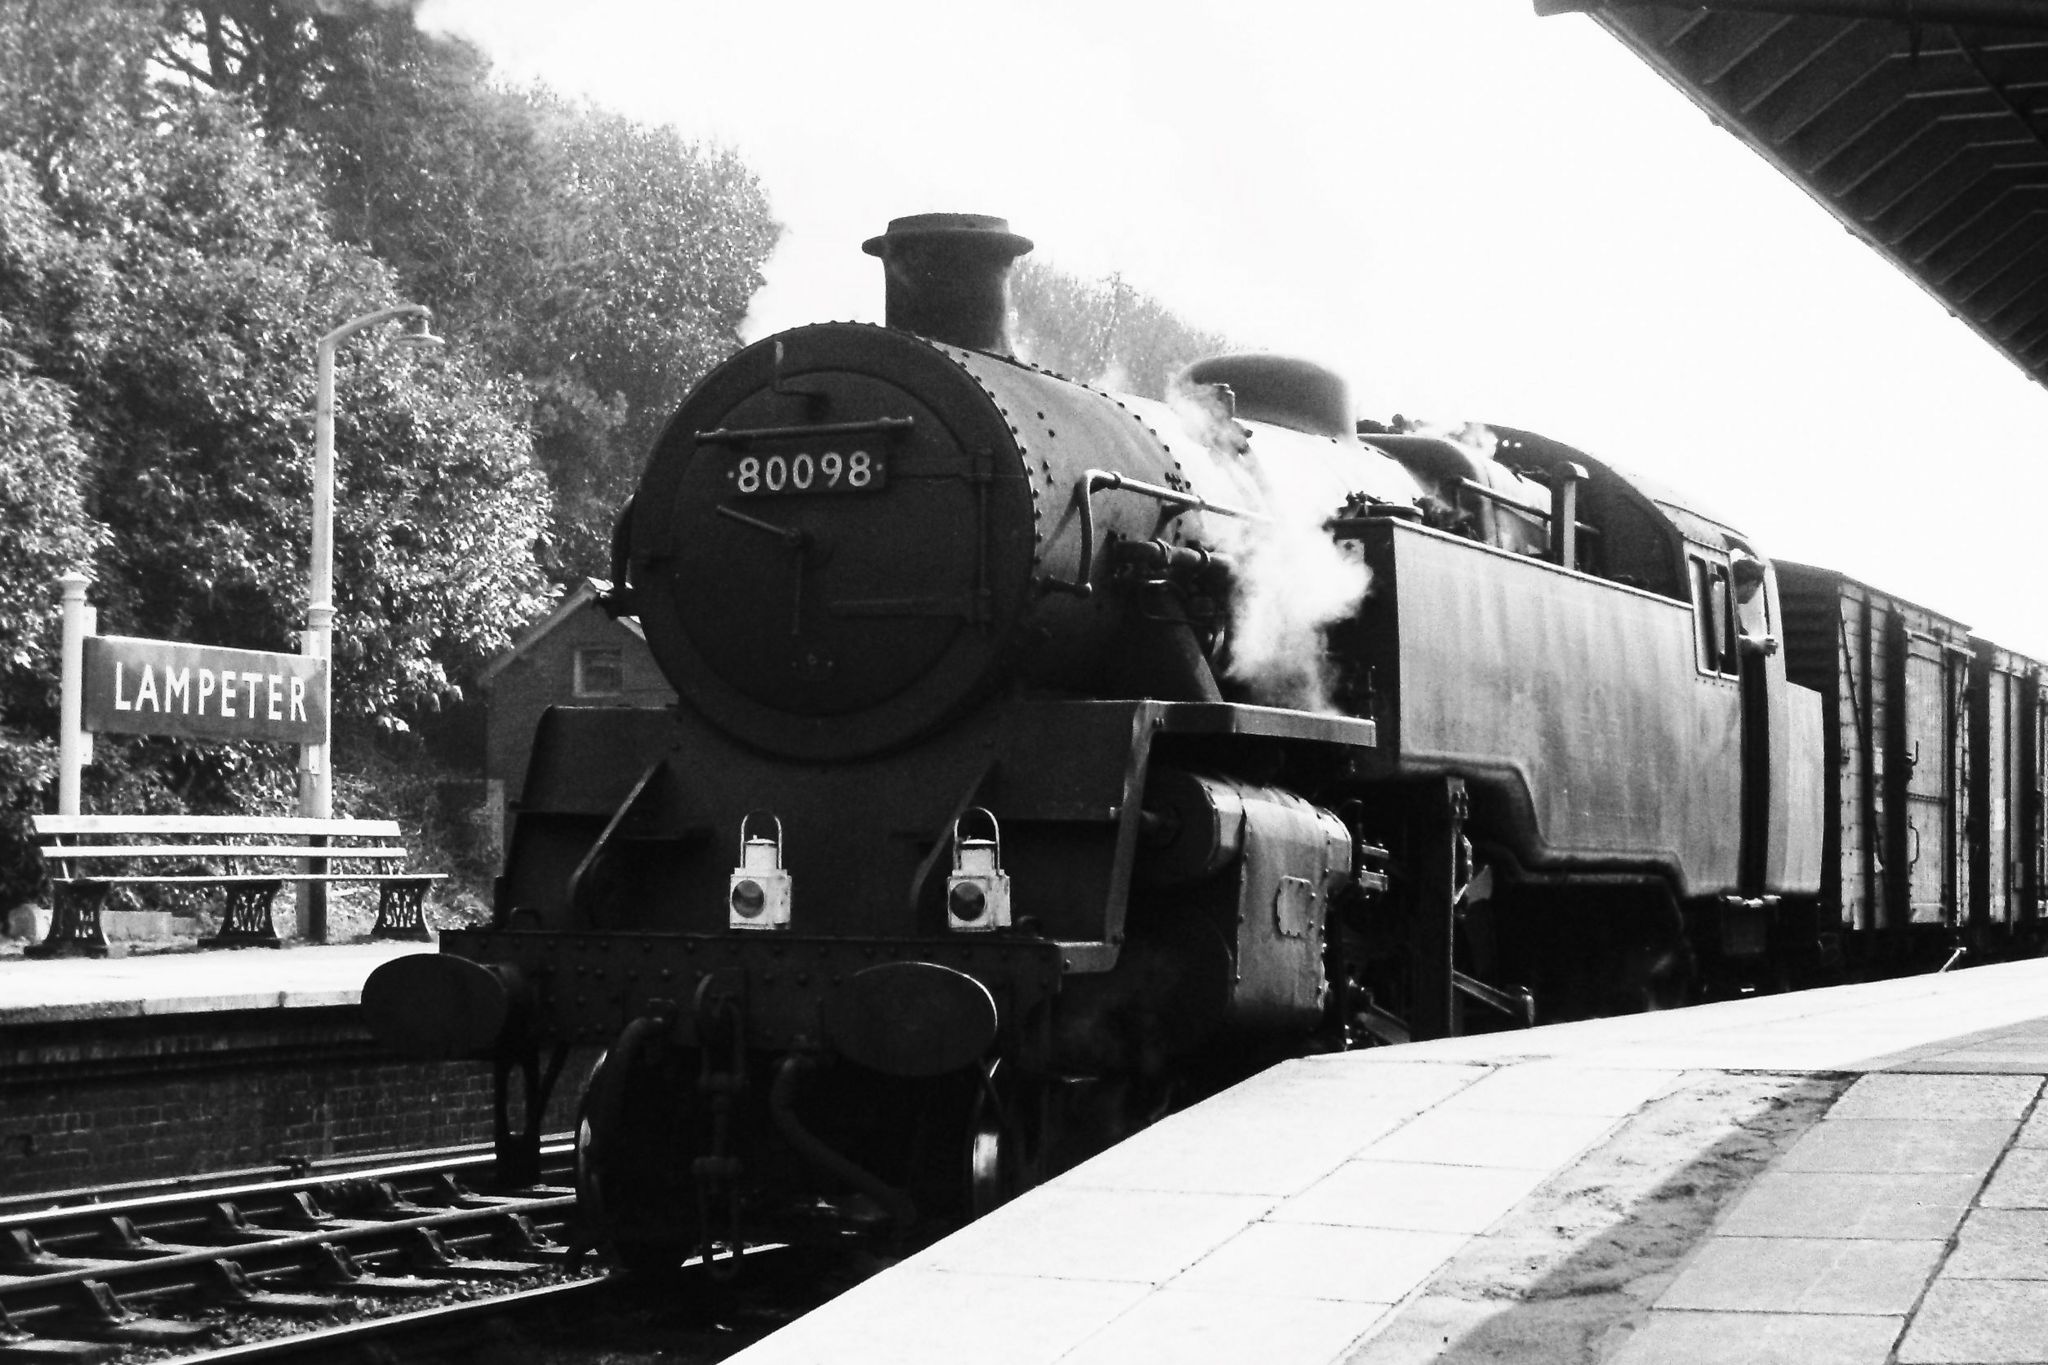 North-bound goods train at Lampeter in 1964